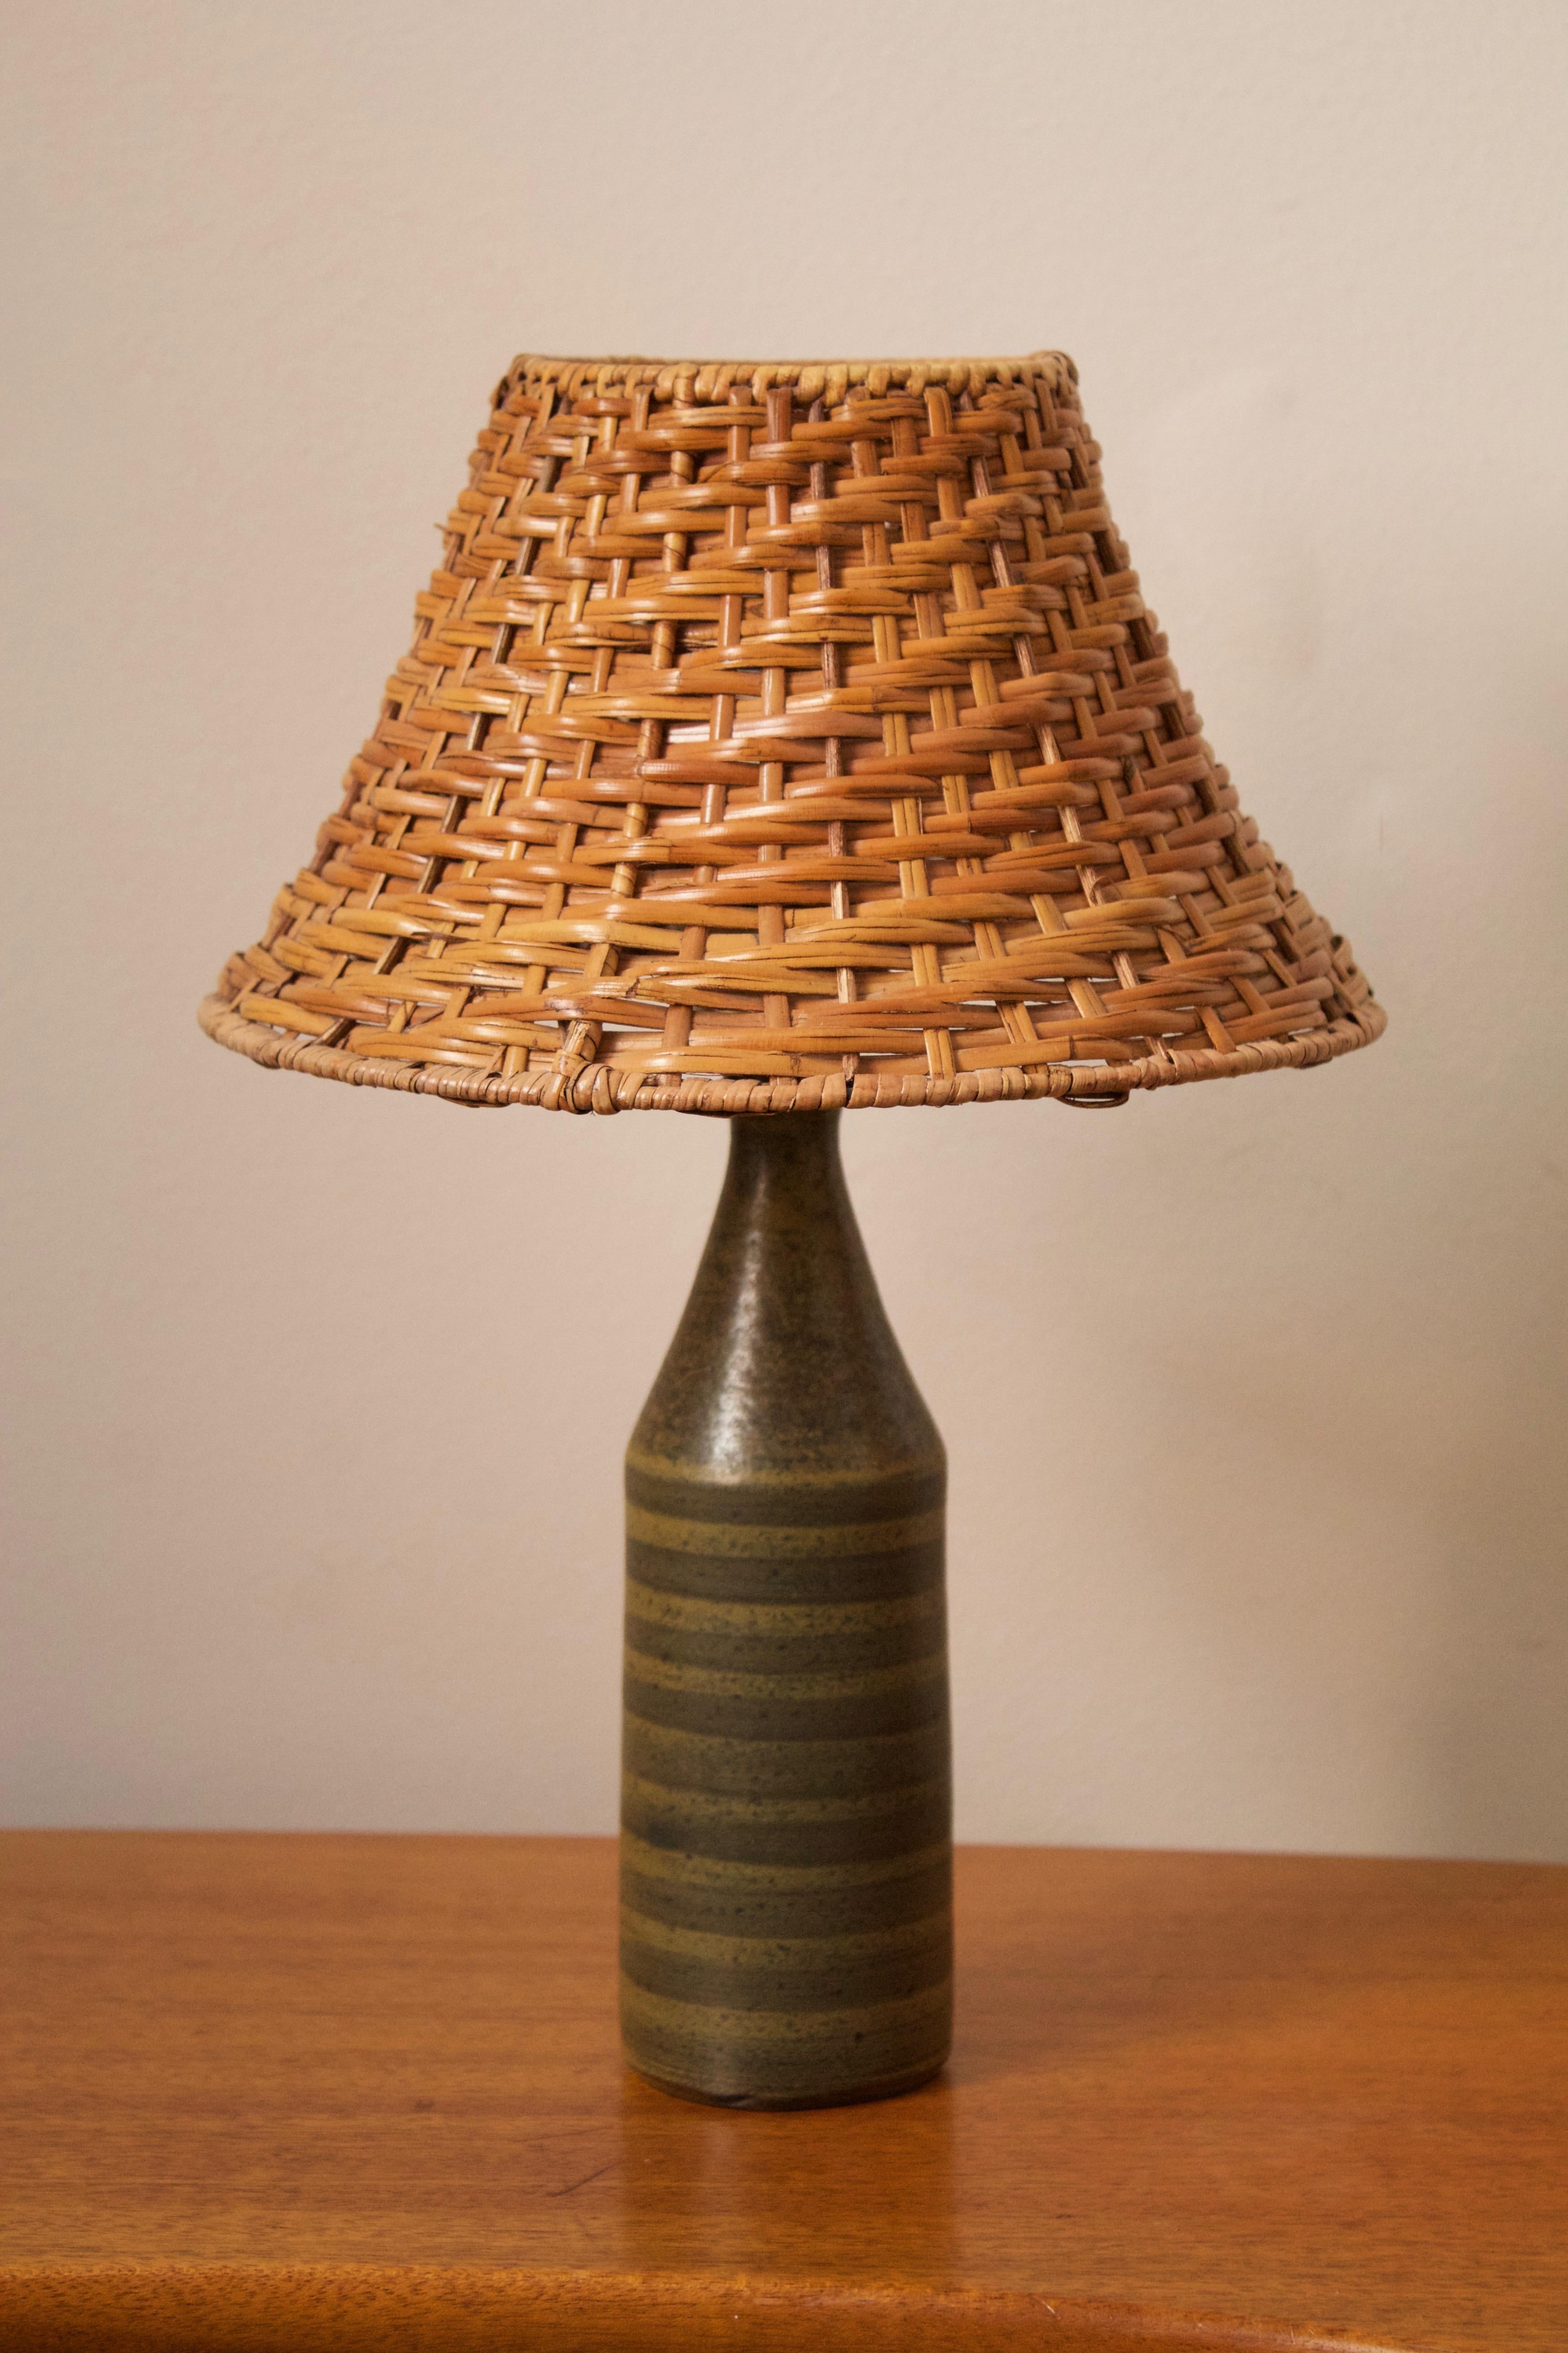 A table lamp. Designed and produced by Wallåkra, Sweden, 1960s. Features simple hand-painted and incised decoration.

Stated dimensions exclude lampshade. Height includes socket. Upon request illustrated lampshade can be included in purchase.